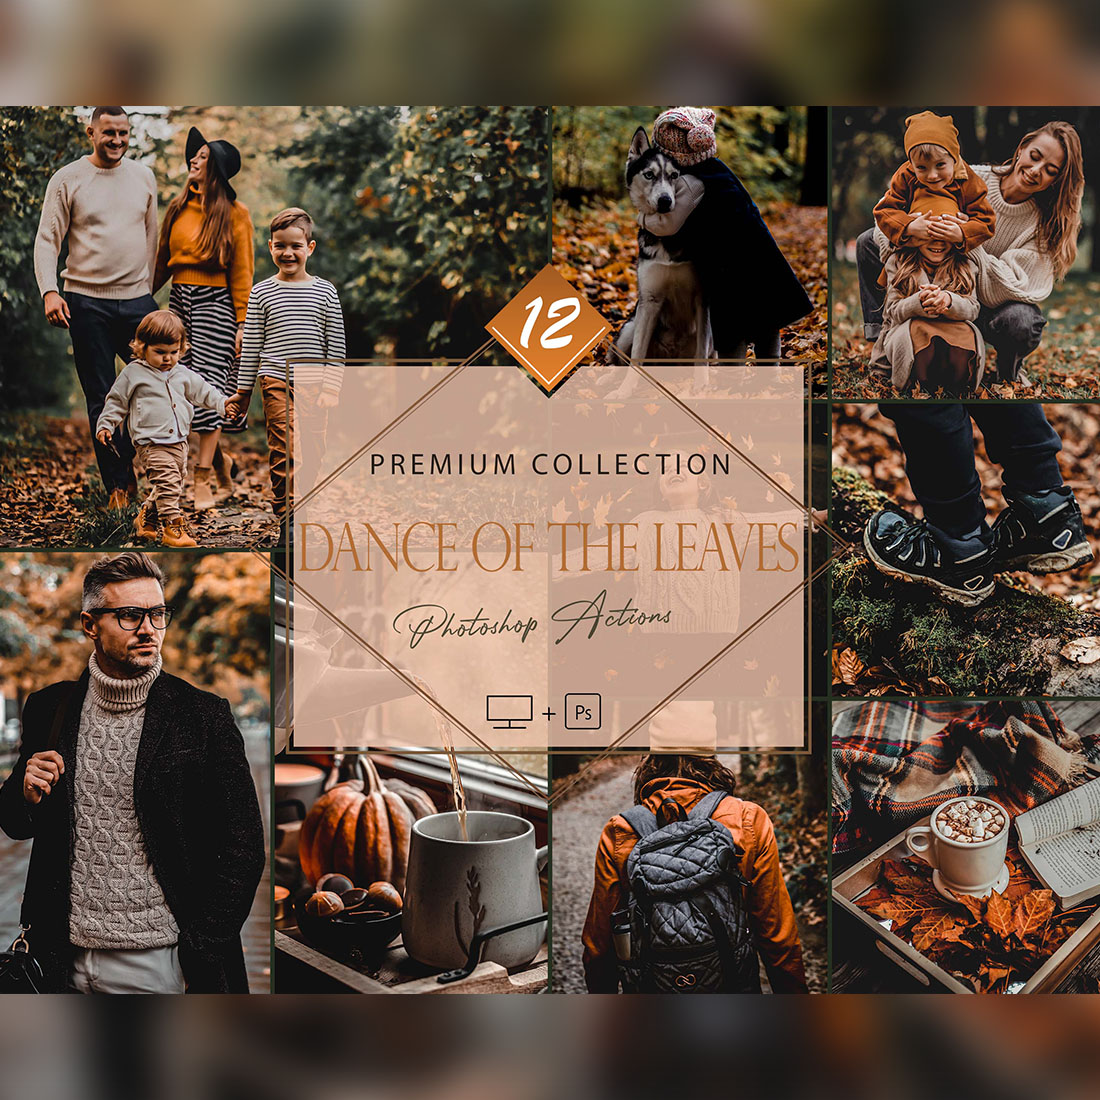 12 Photoshop Actions, Dance Of The Leaves Ps Action, Moody ACR Preset, Fall Filter, Lifestyle Theme For Instagram, Autumn Presets, Warm portrait cover image.